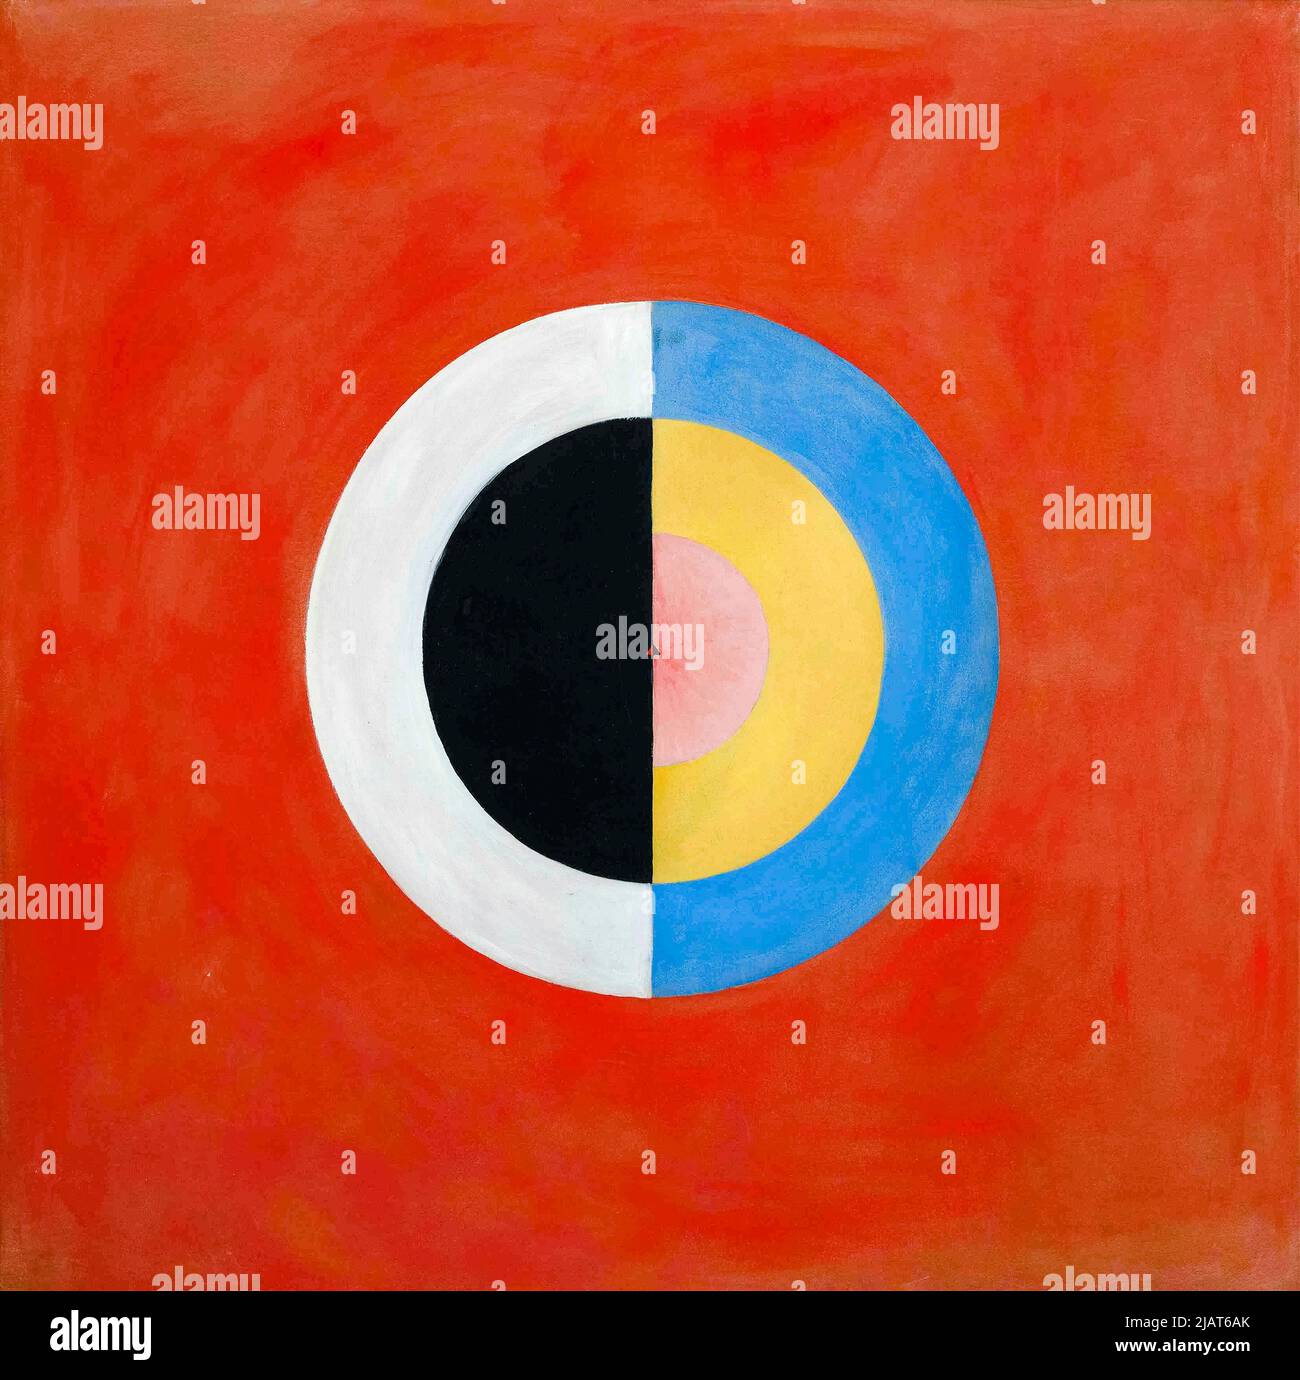 Hilma af Klint, Swan. Abstract painting in oil on canvas entitled, 'Group IX,SUW, No 17, The Swan', 1914-1915 - modern art Stock Photo